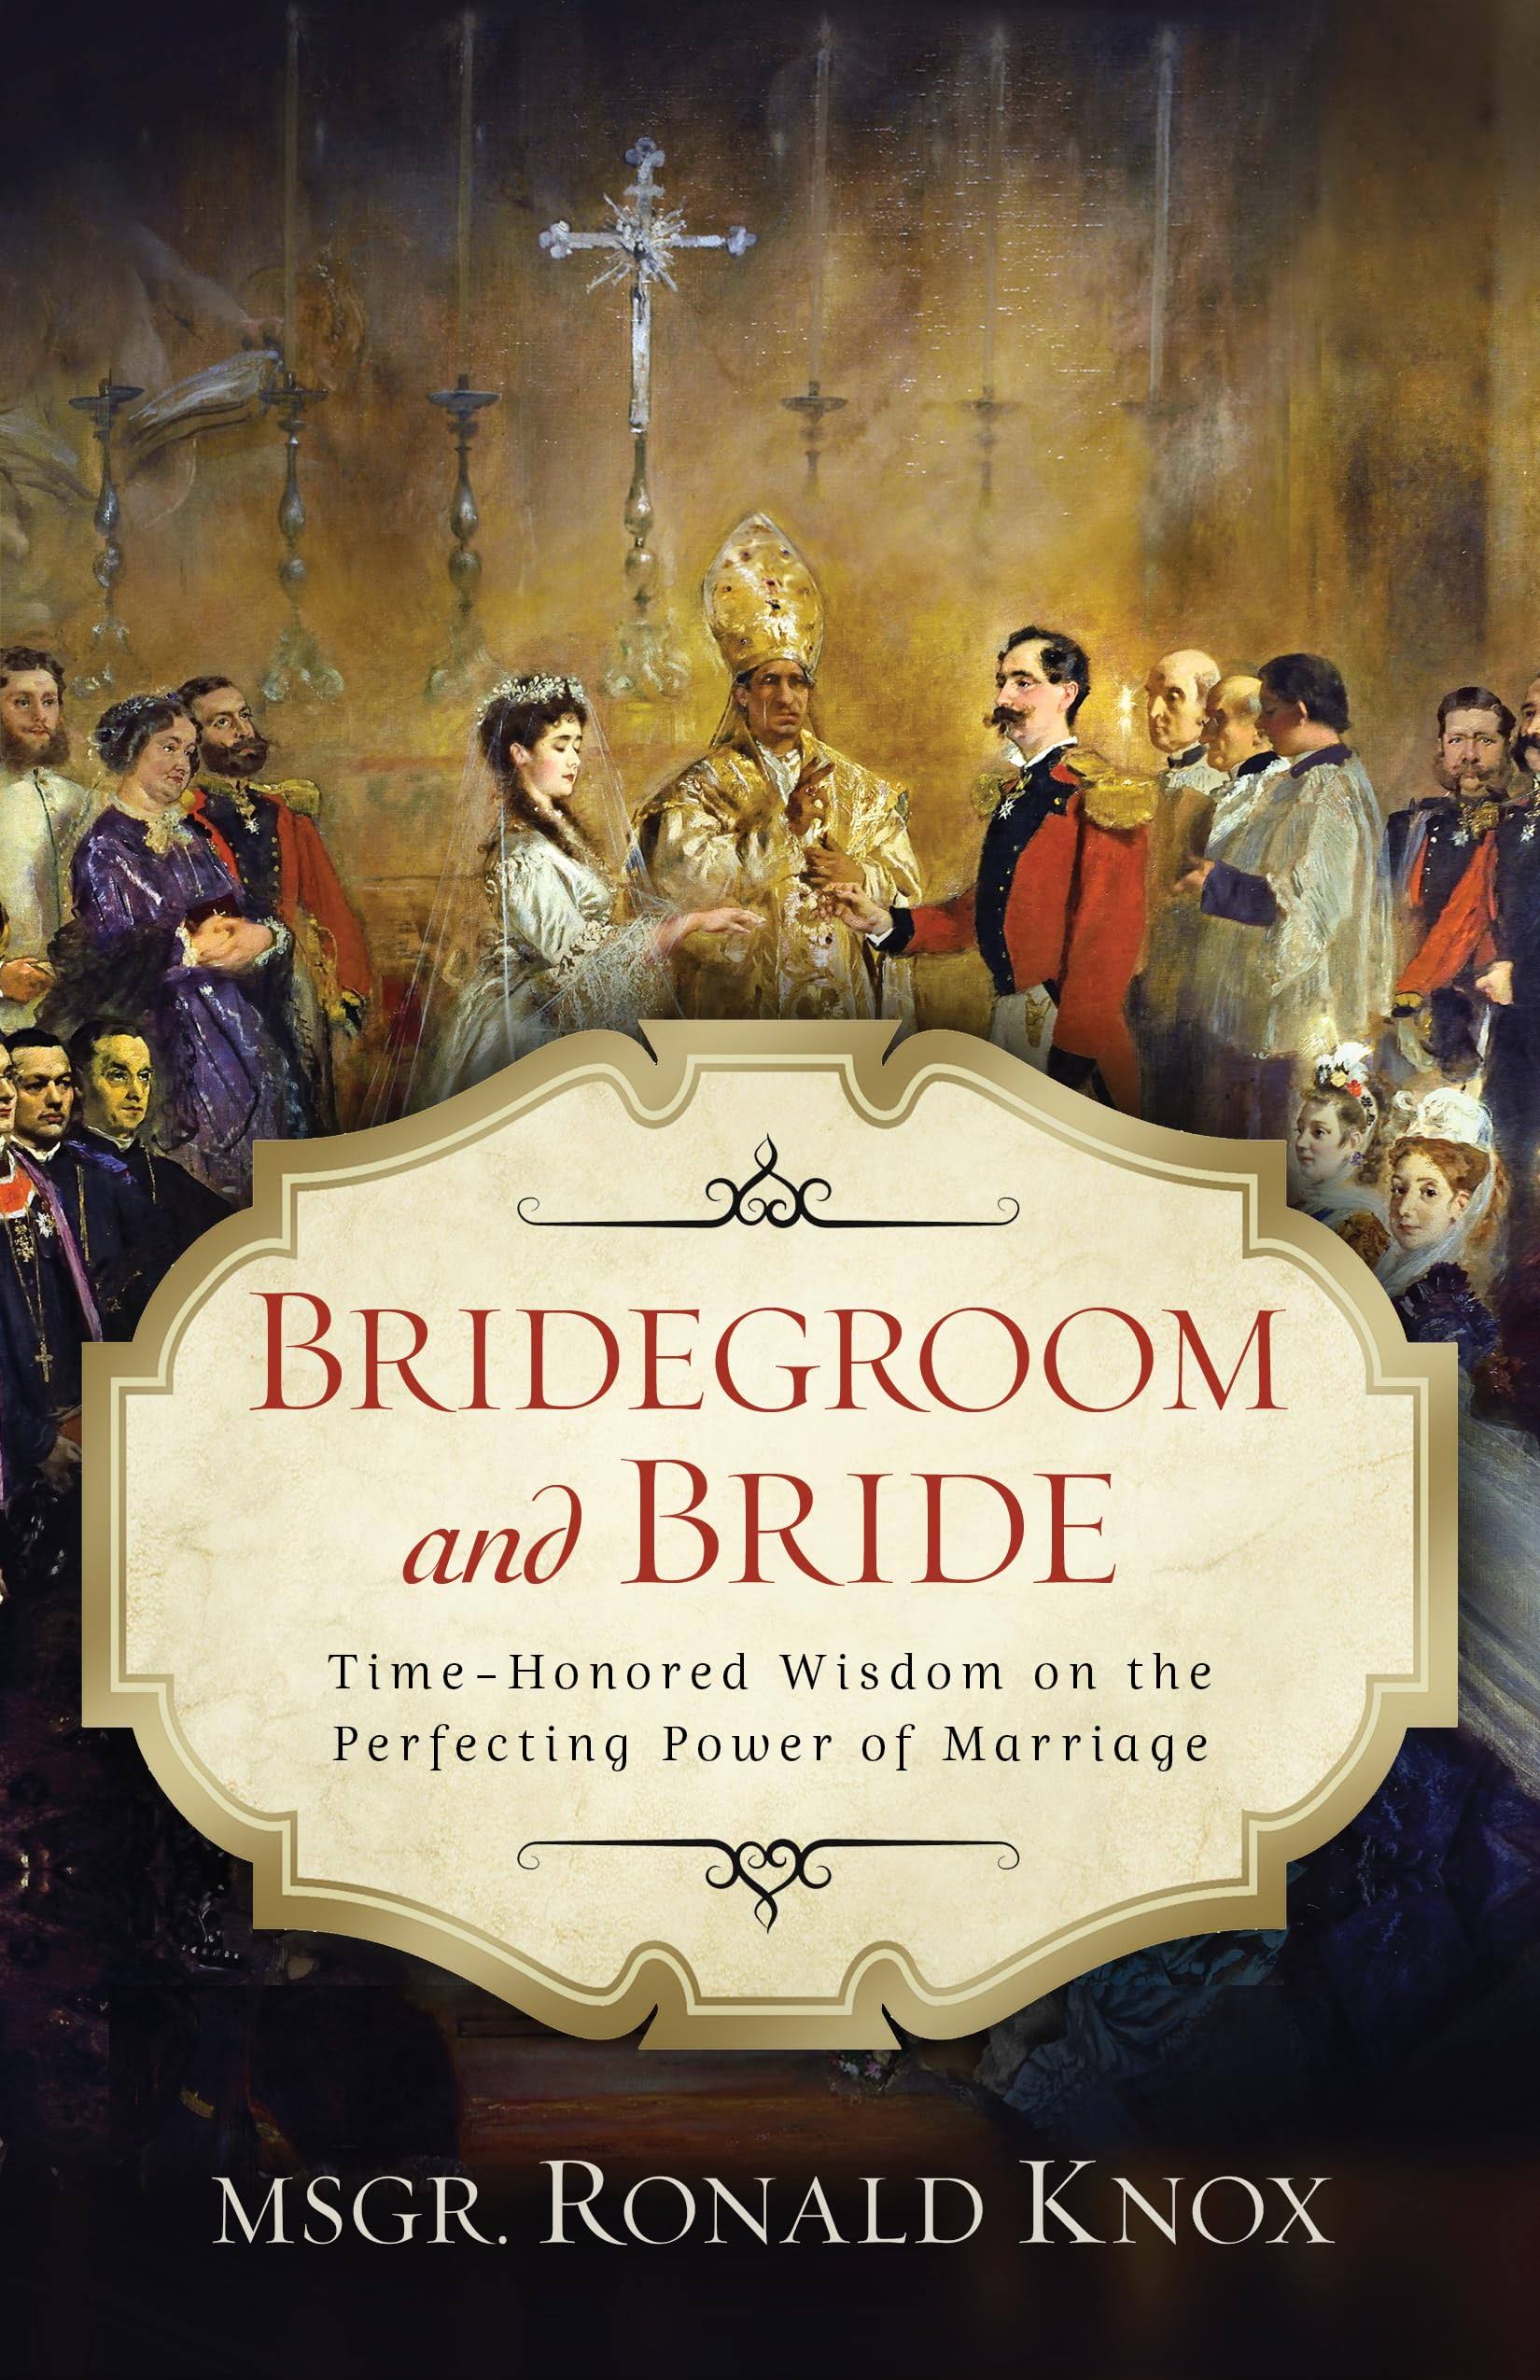 Bridegroom and Bride: Time-Honored Wisdom on the Perfecting Power of Marriage [Book]